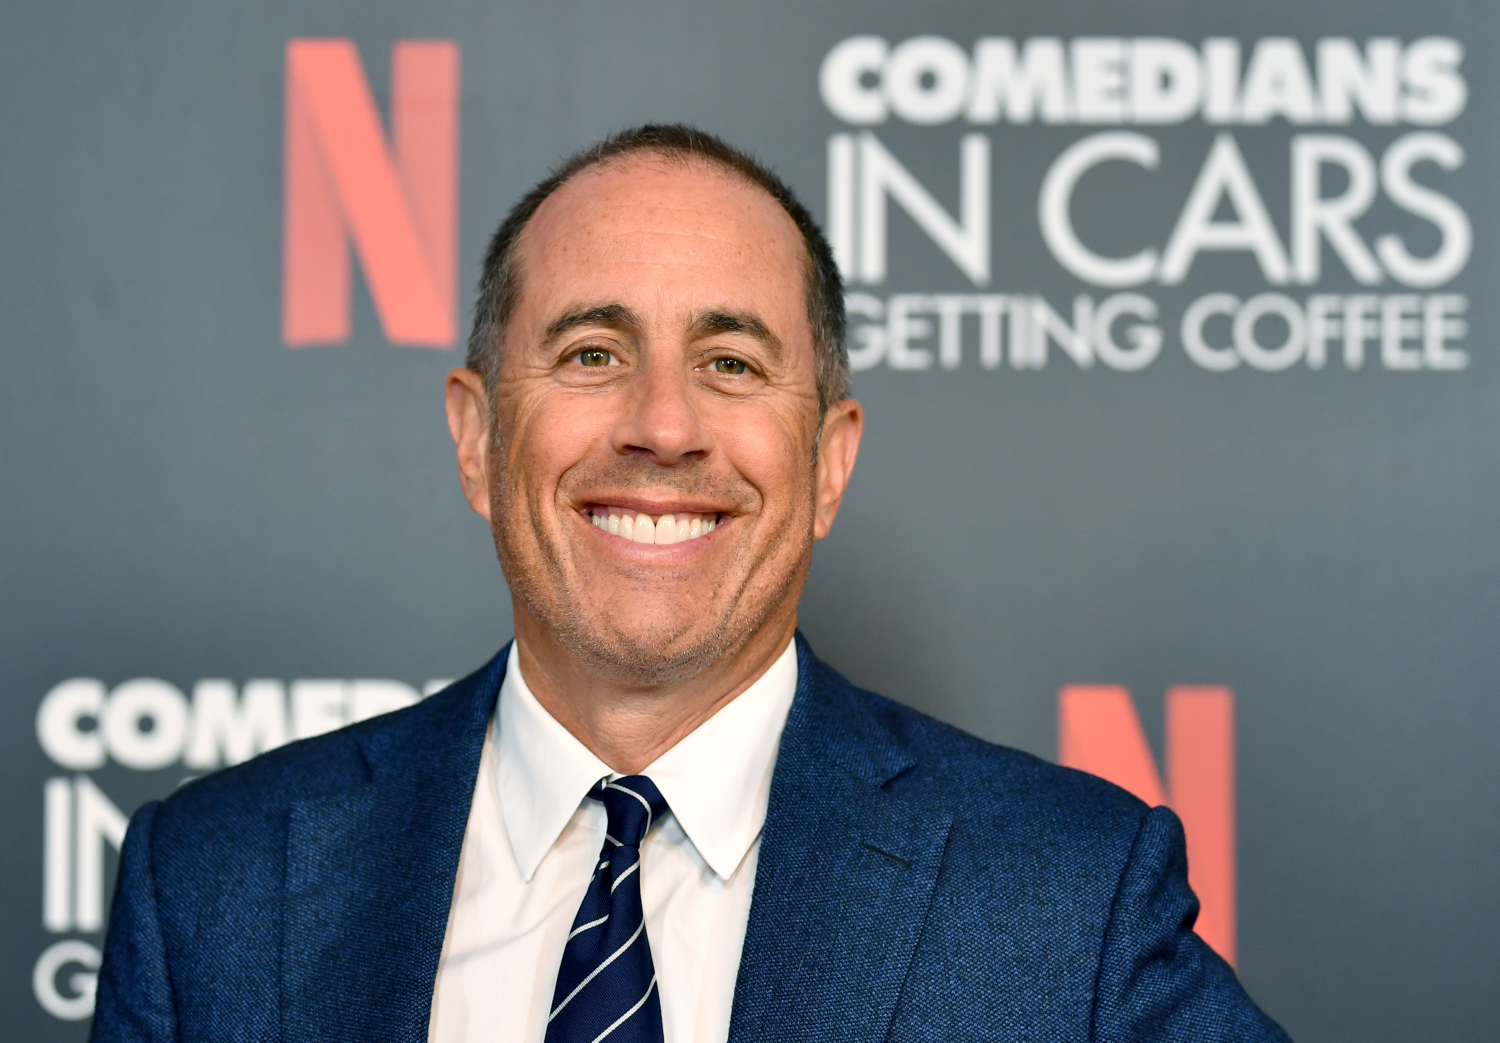 Jerry Seinfeld smiles during 'Comedians in Cars' event